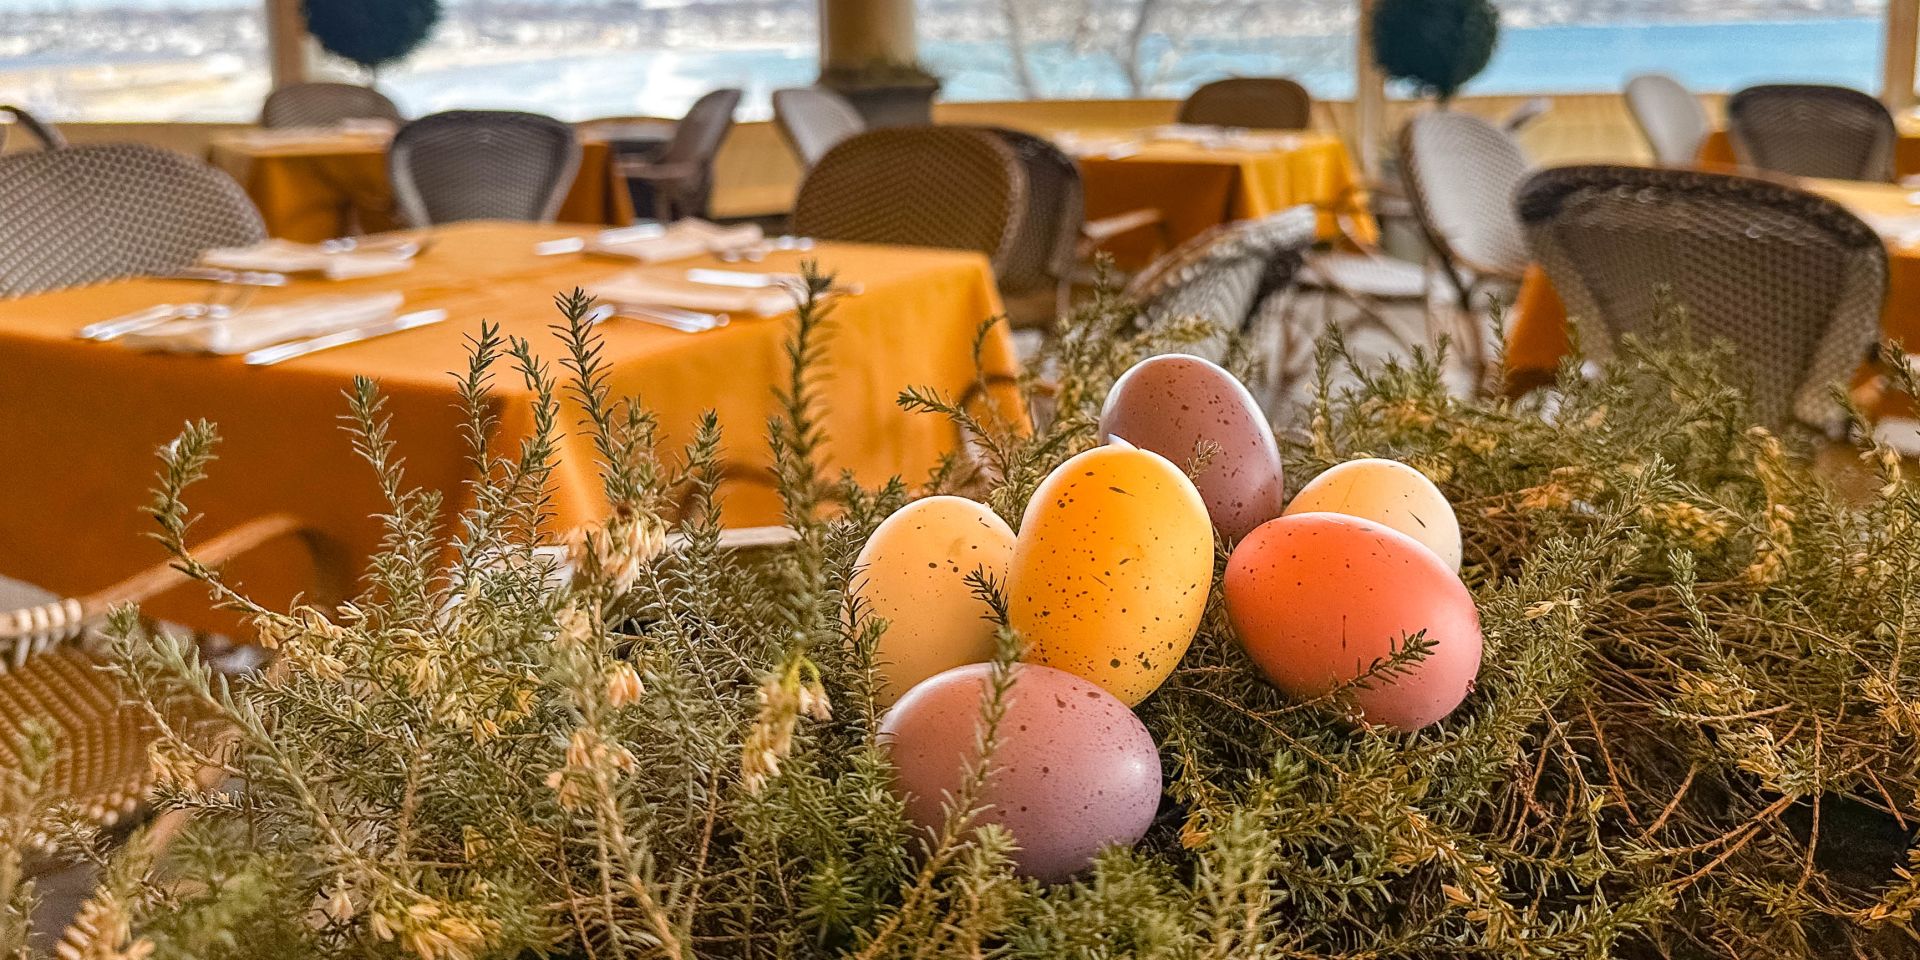 A Table With Chairs And A Table With Orange Balls On It